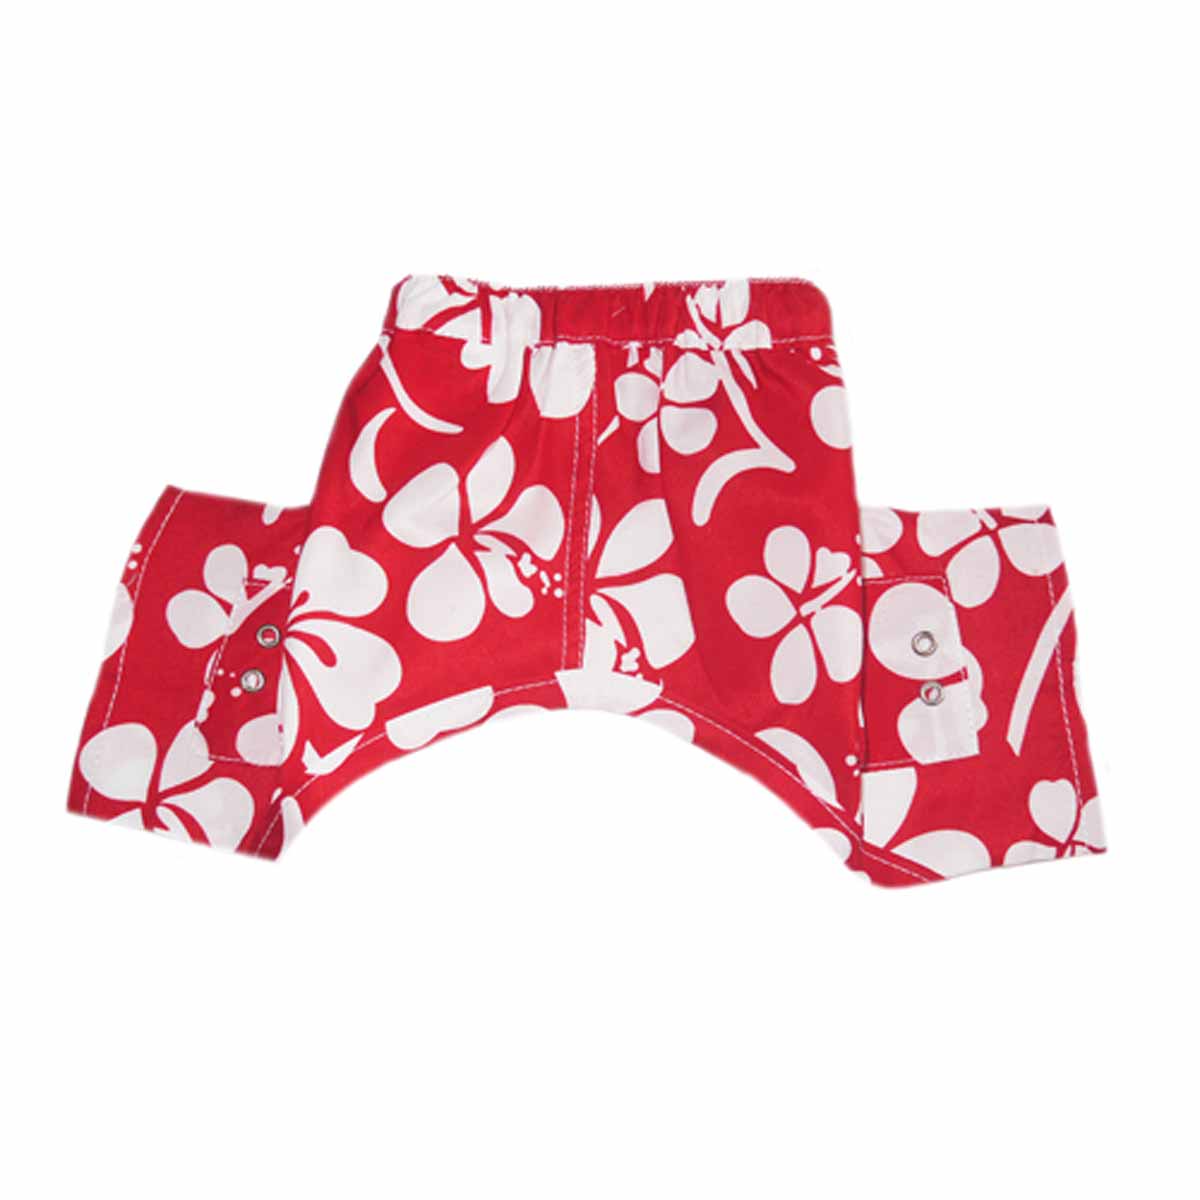 Pooch Outfitters Okinawa Dog Swim Trunks - Red